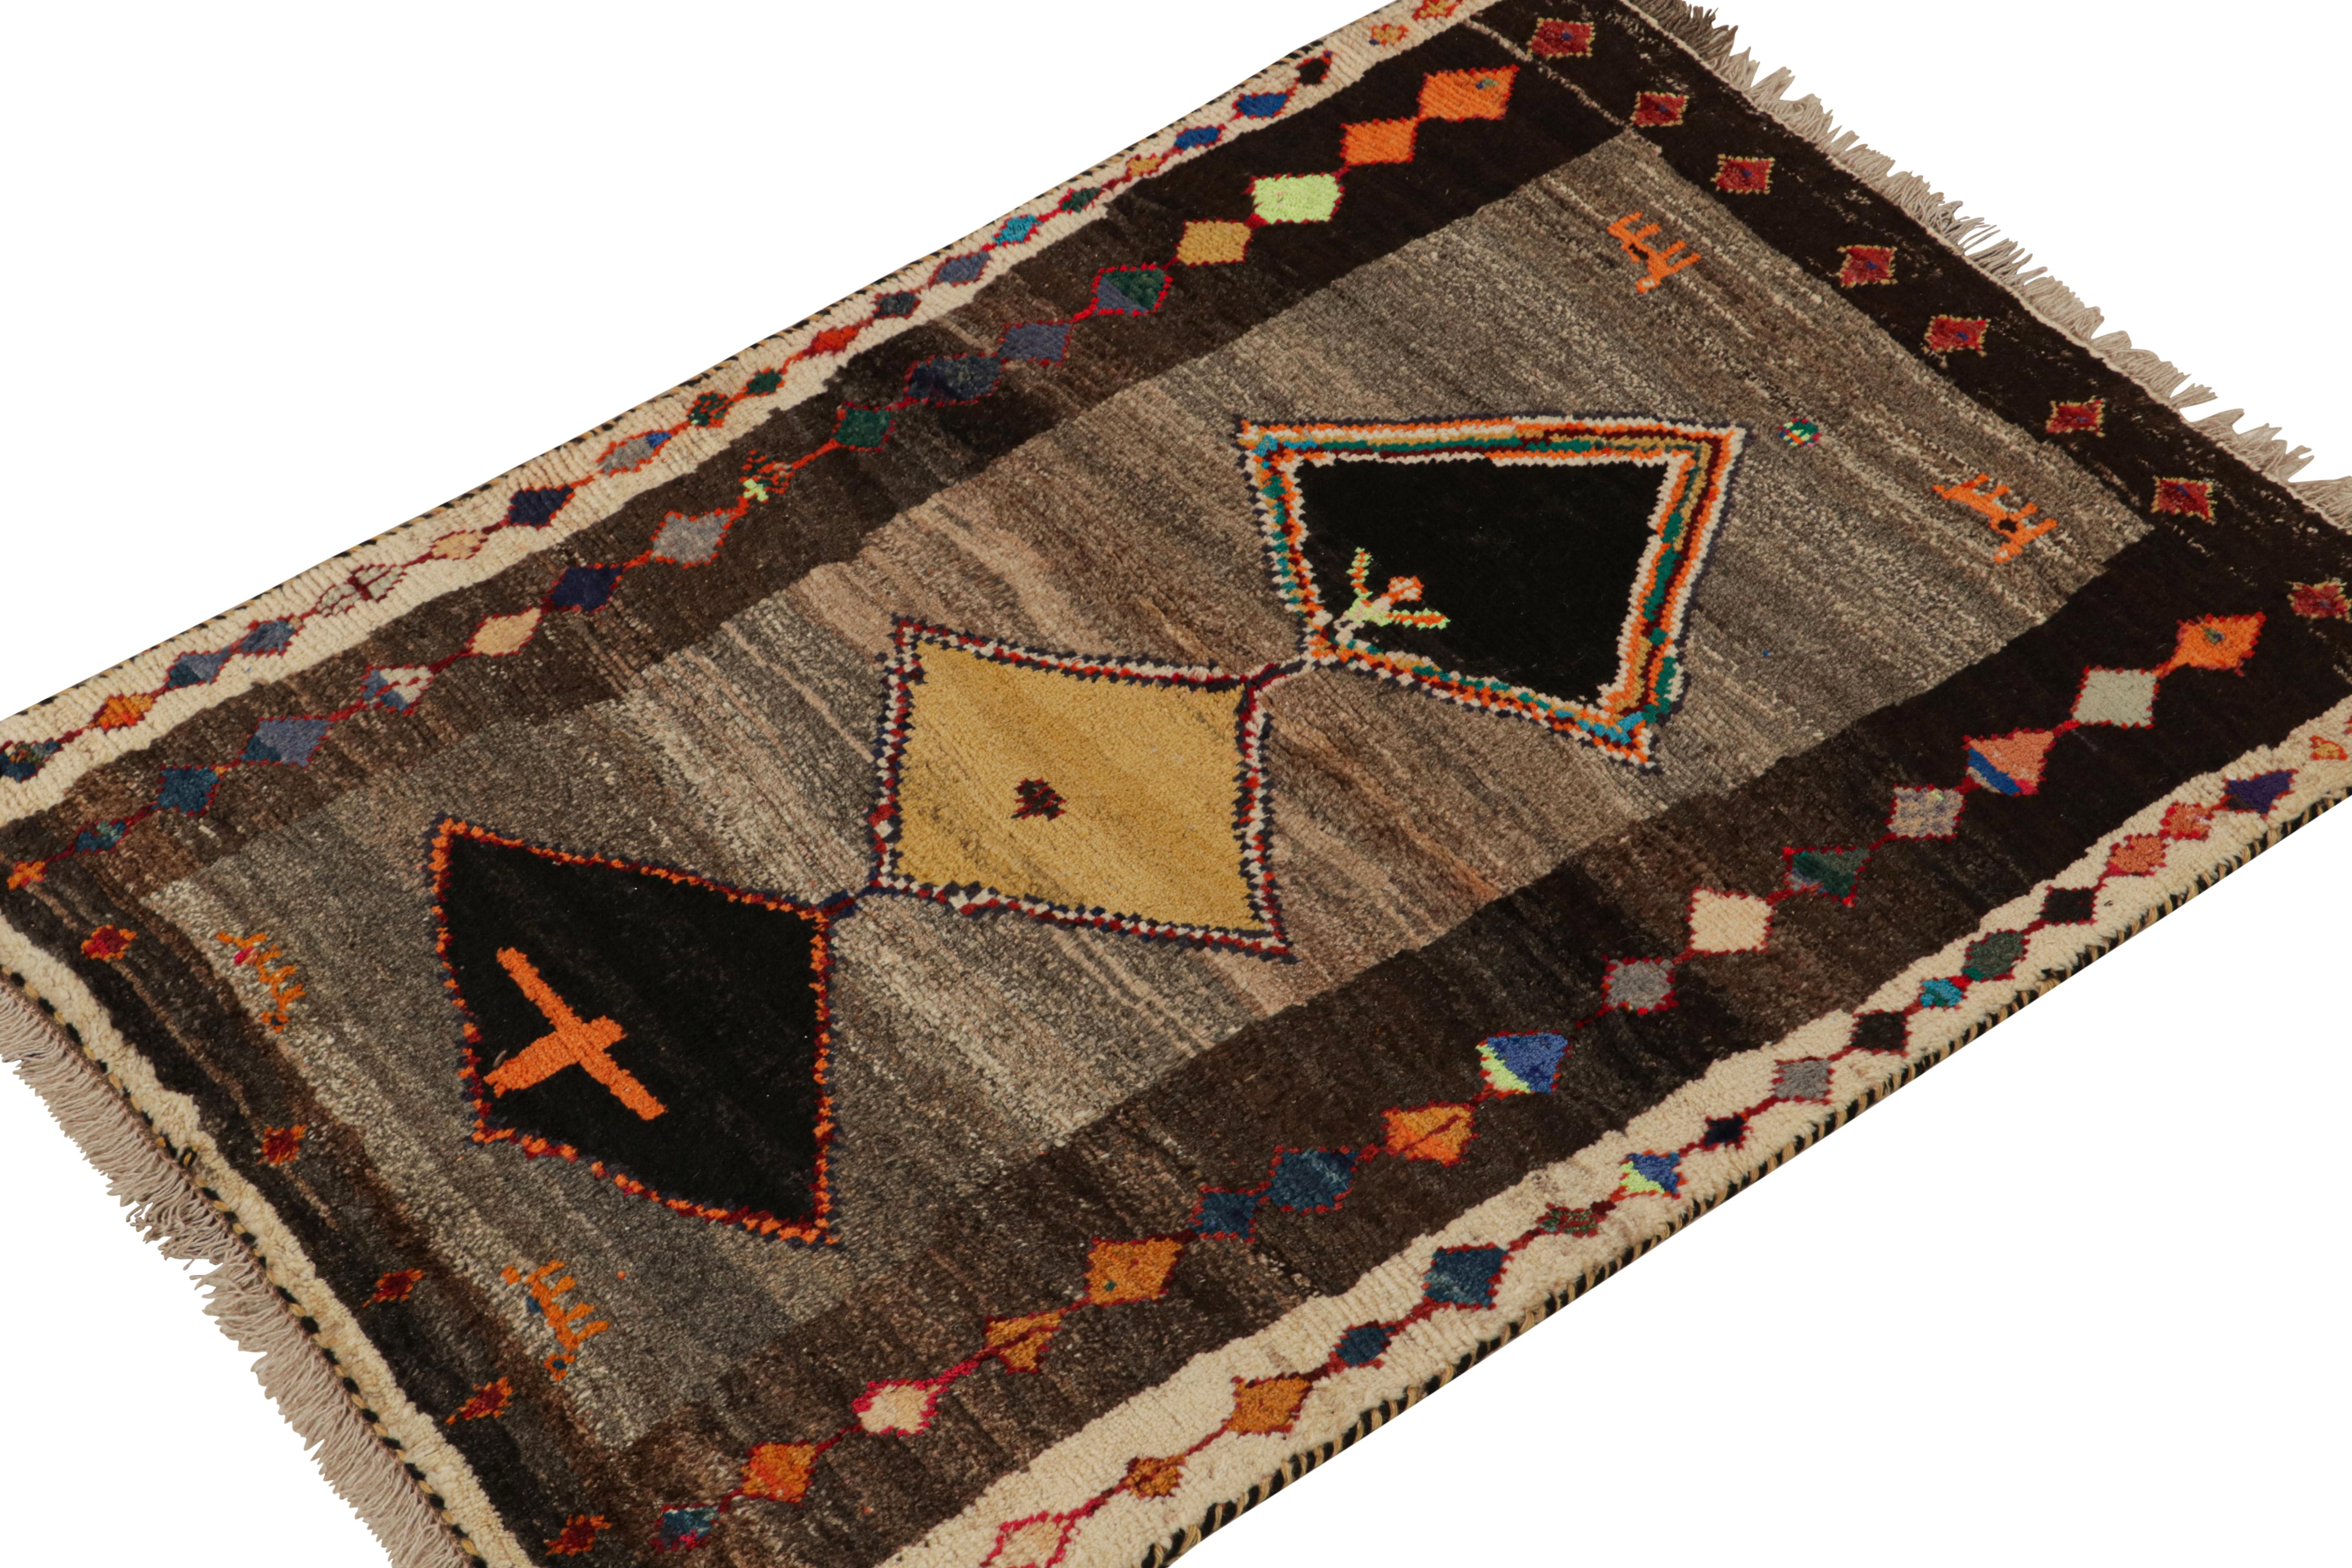 This vintage 4x5 Gabbeh Persian rug is from the latest entries in Rug & Kilim’s rare tribal curations. Hand-knotted in wool circa 1950-1960.

On the Design:
This tribal provenance is one of the most primitive, and collectible shabby-chic styles